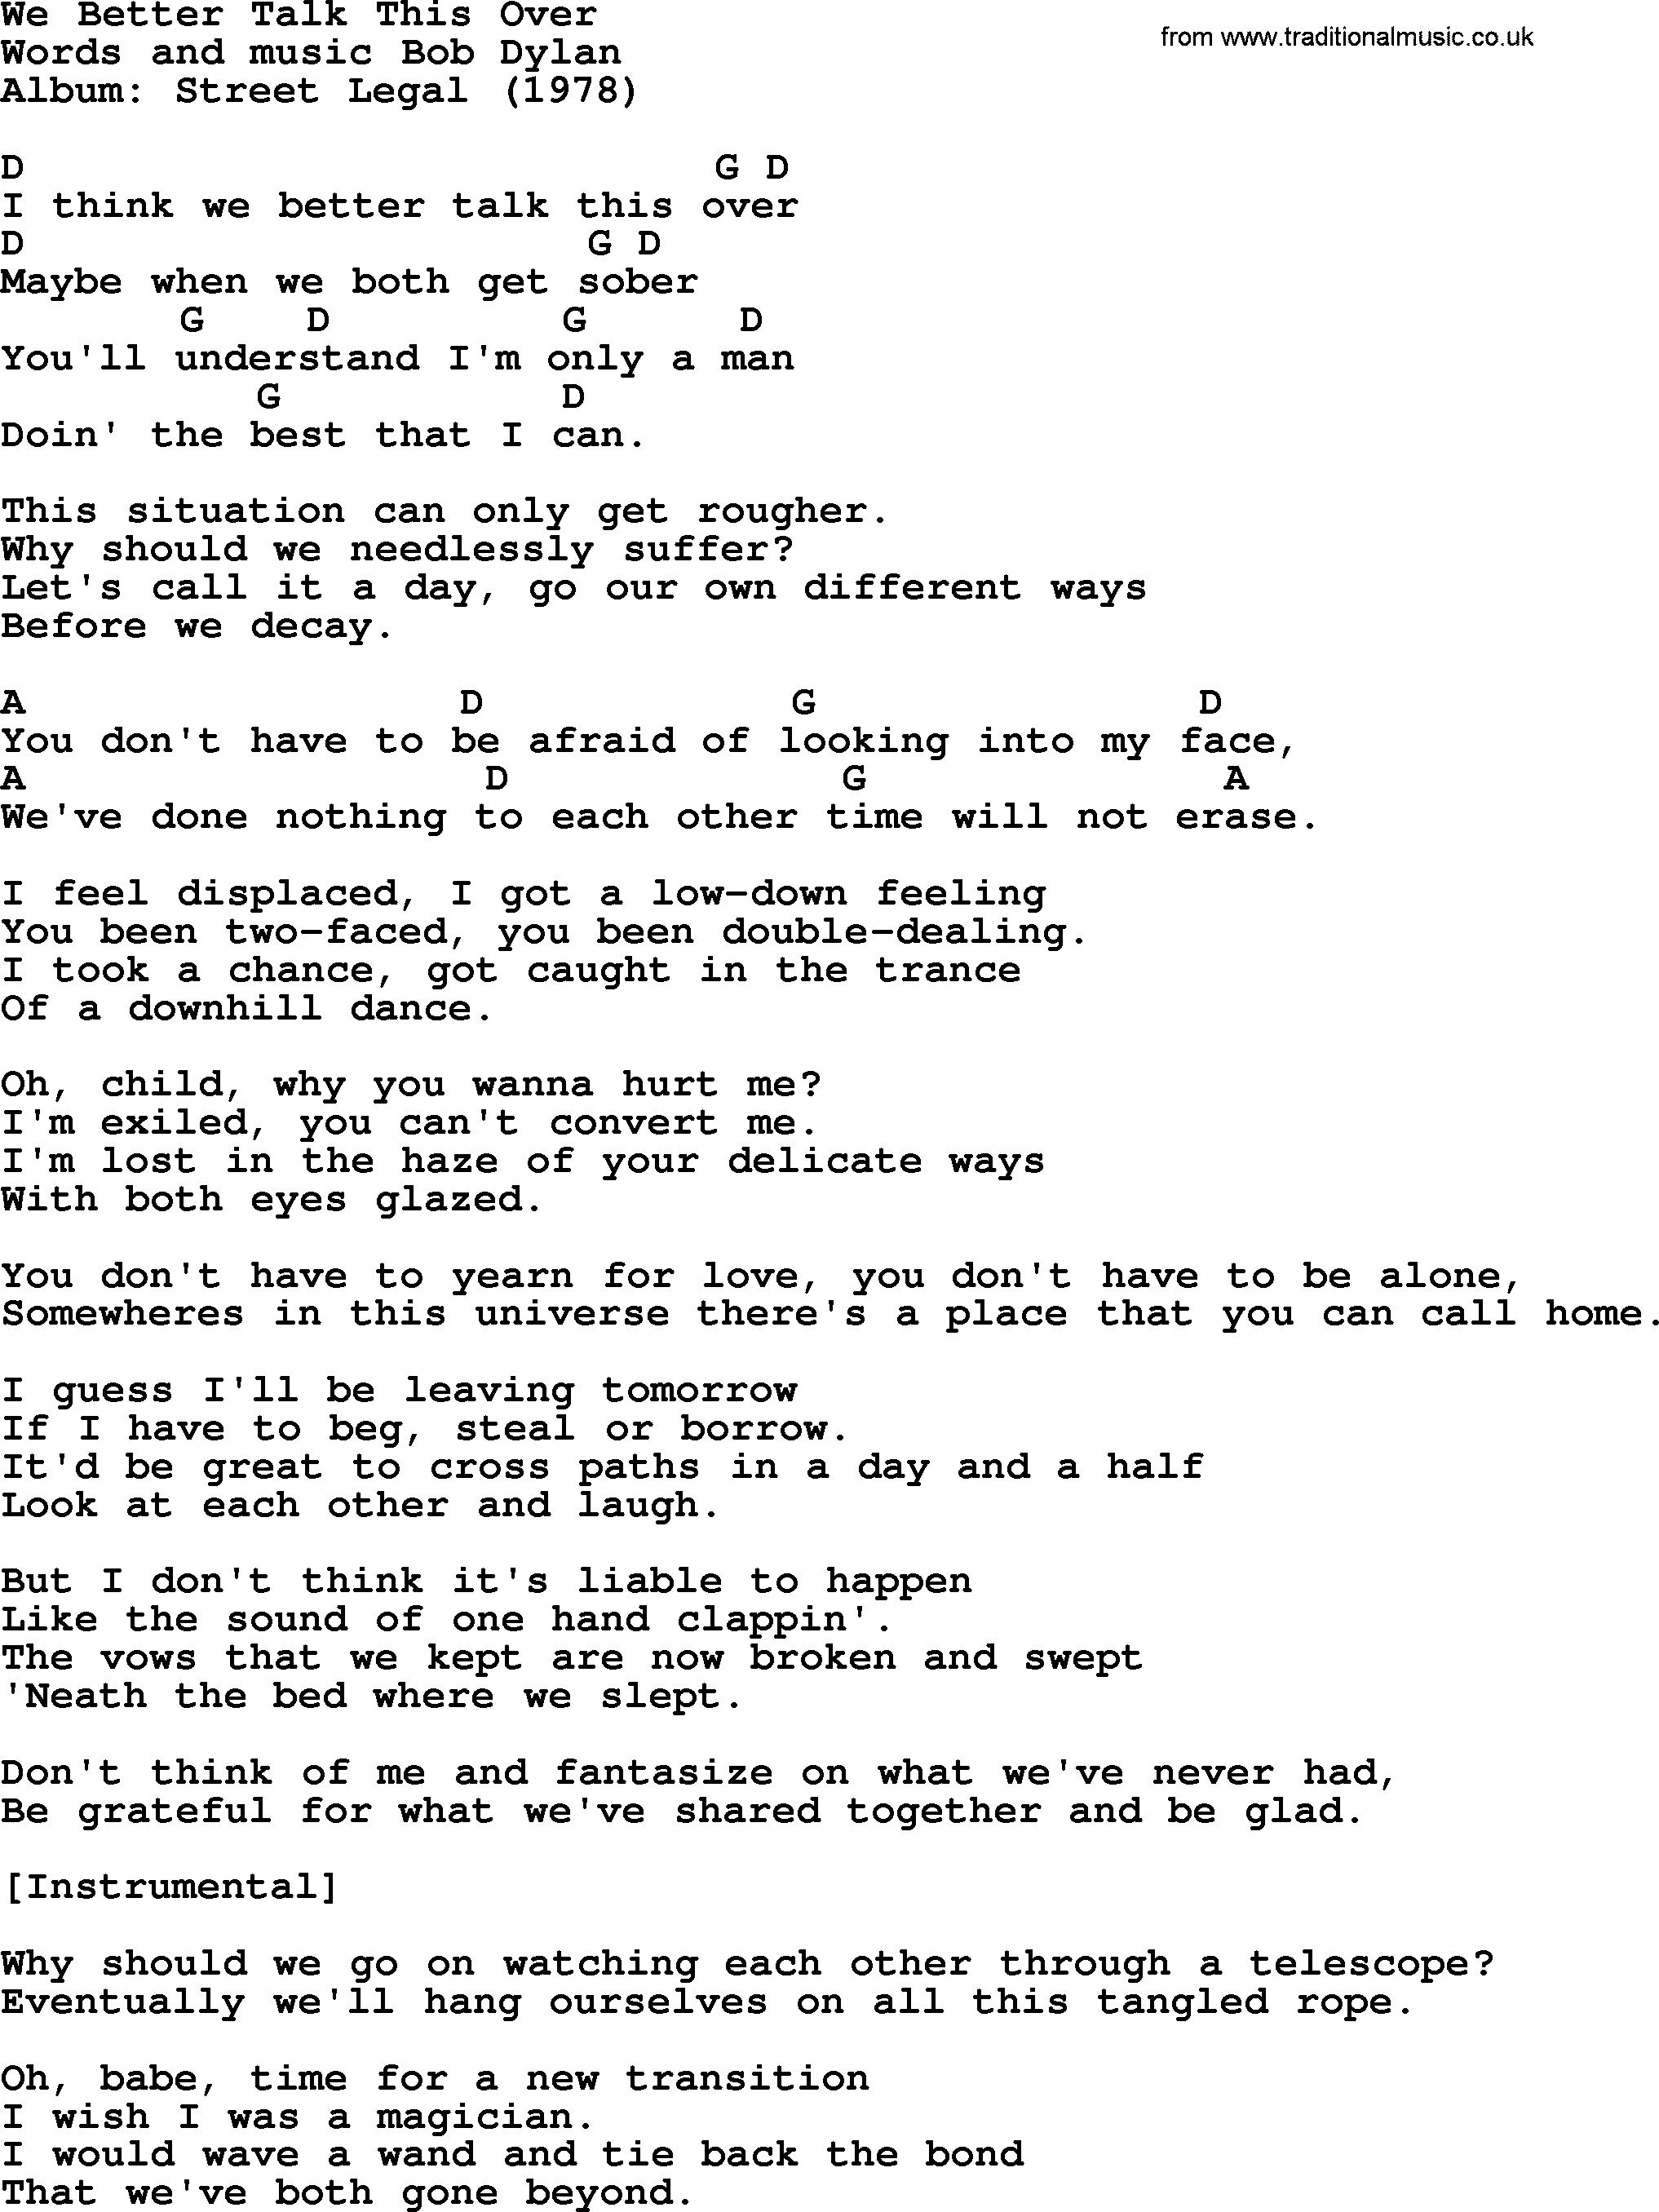 Bob Dylan song, lyrics with chords - We Better Talk This Over